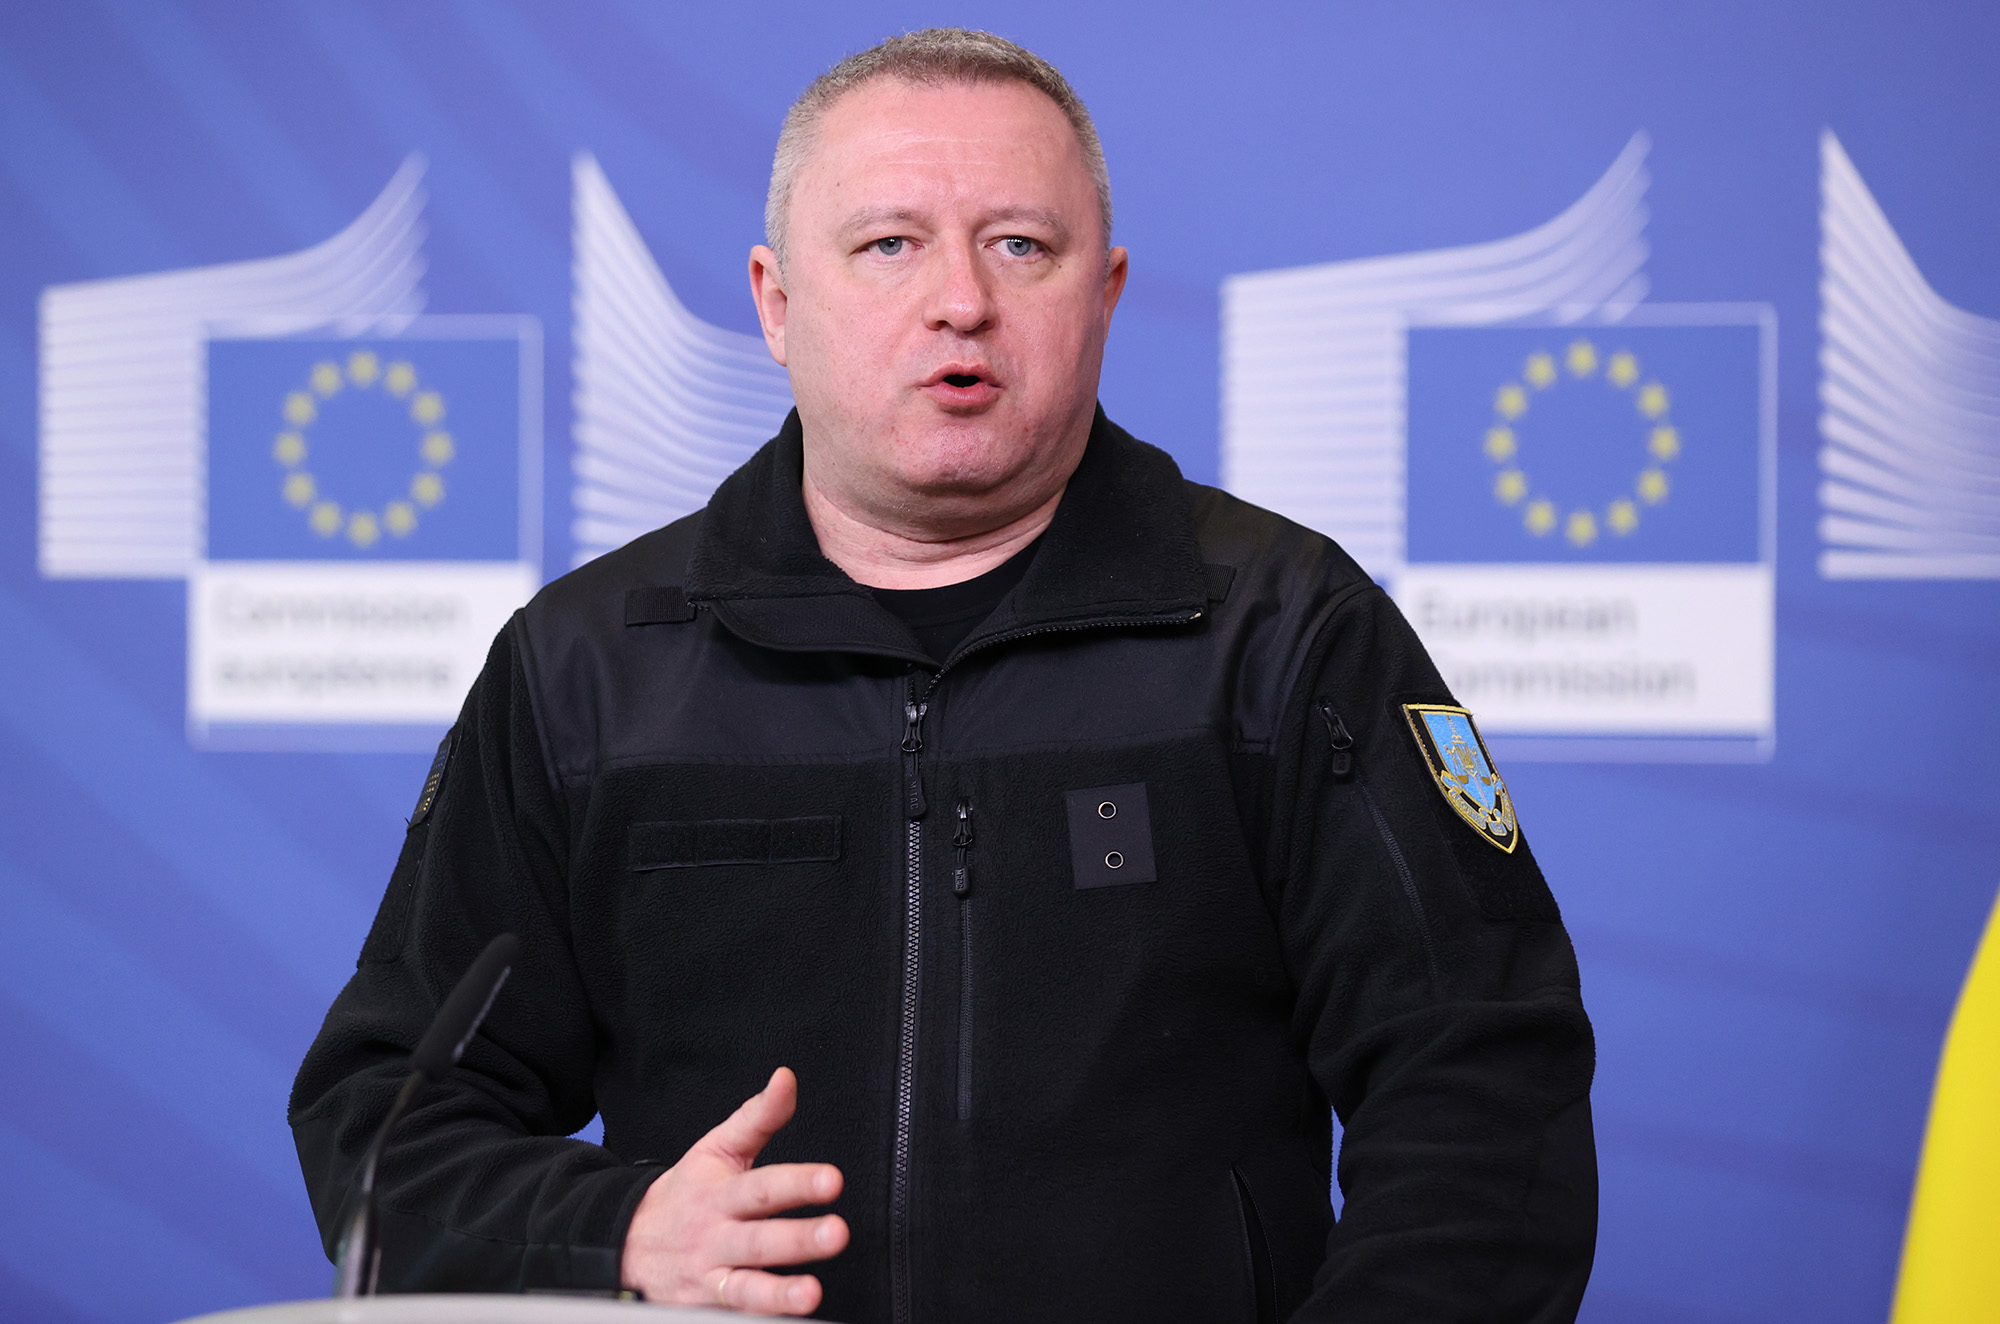 Prosecutor General of Ukraine Andriy Kostin attends a news conference at the EU Commission headquarters on February 17, in Brussels, Belgium. 